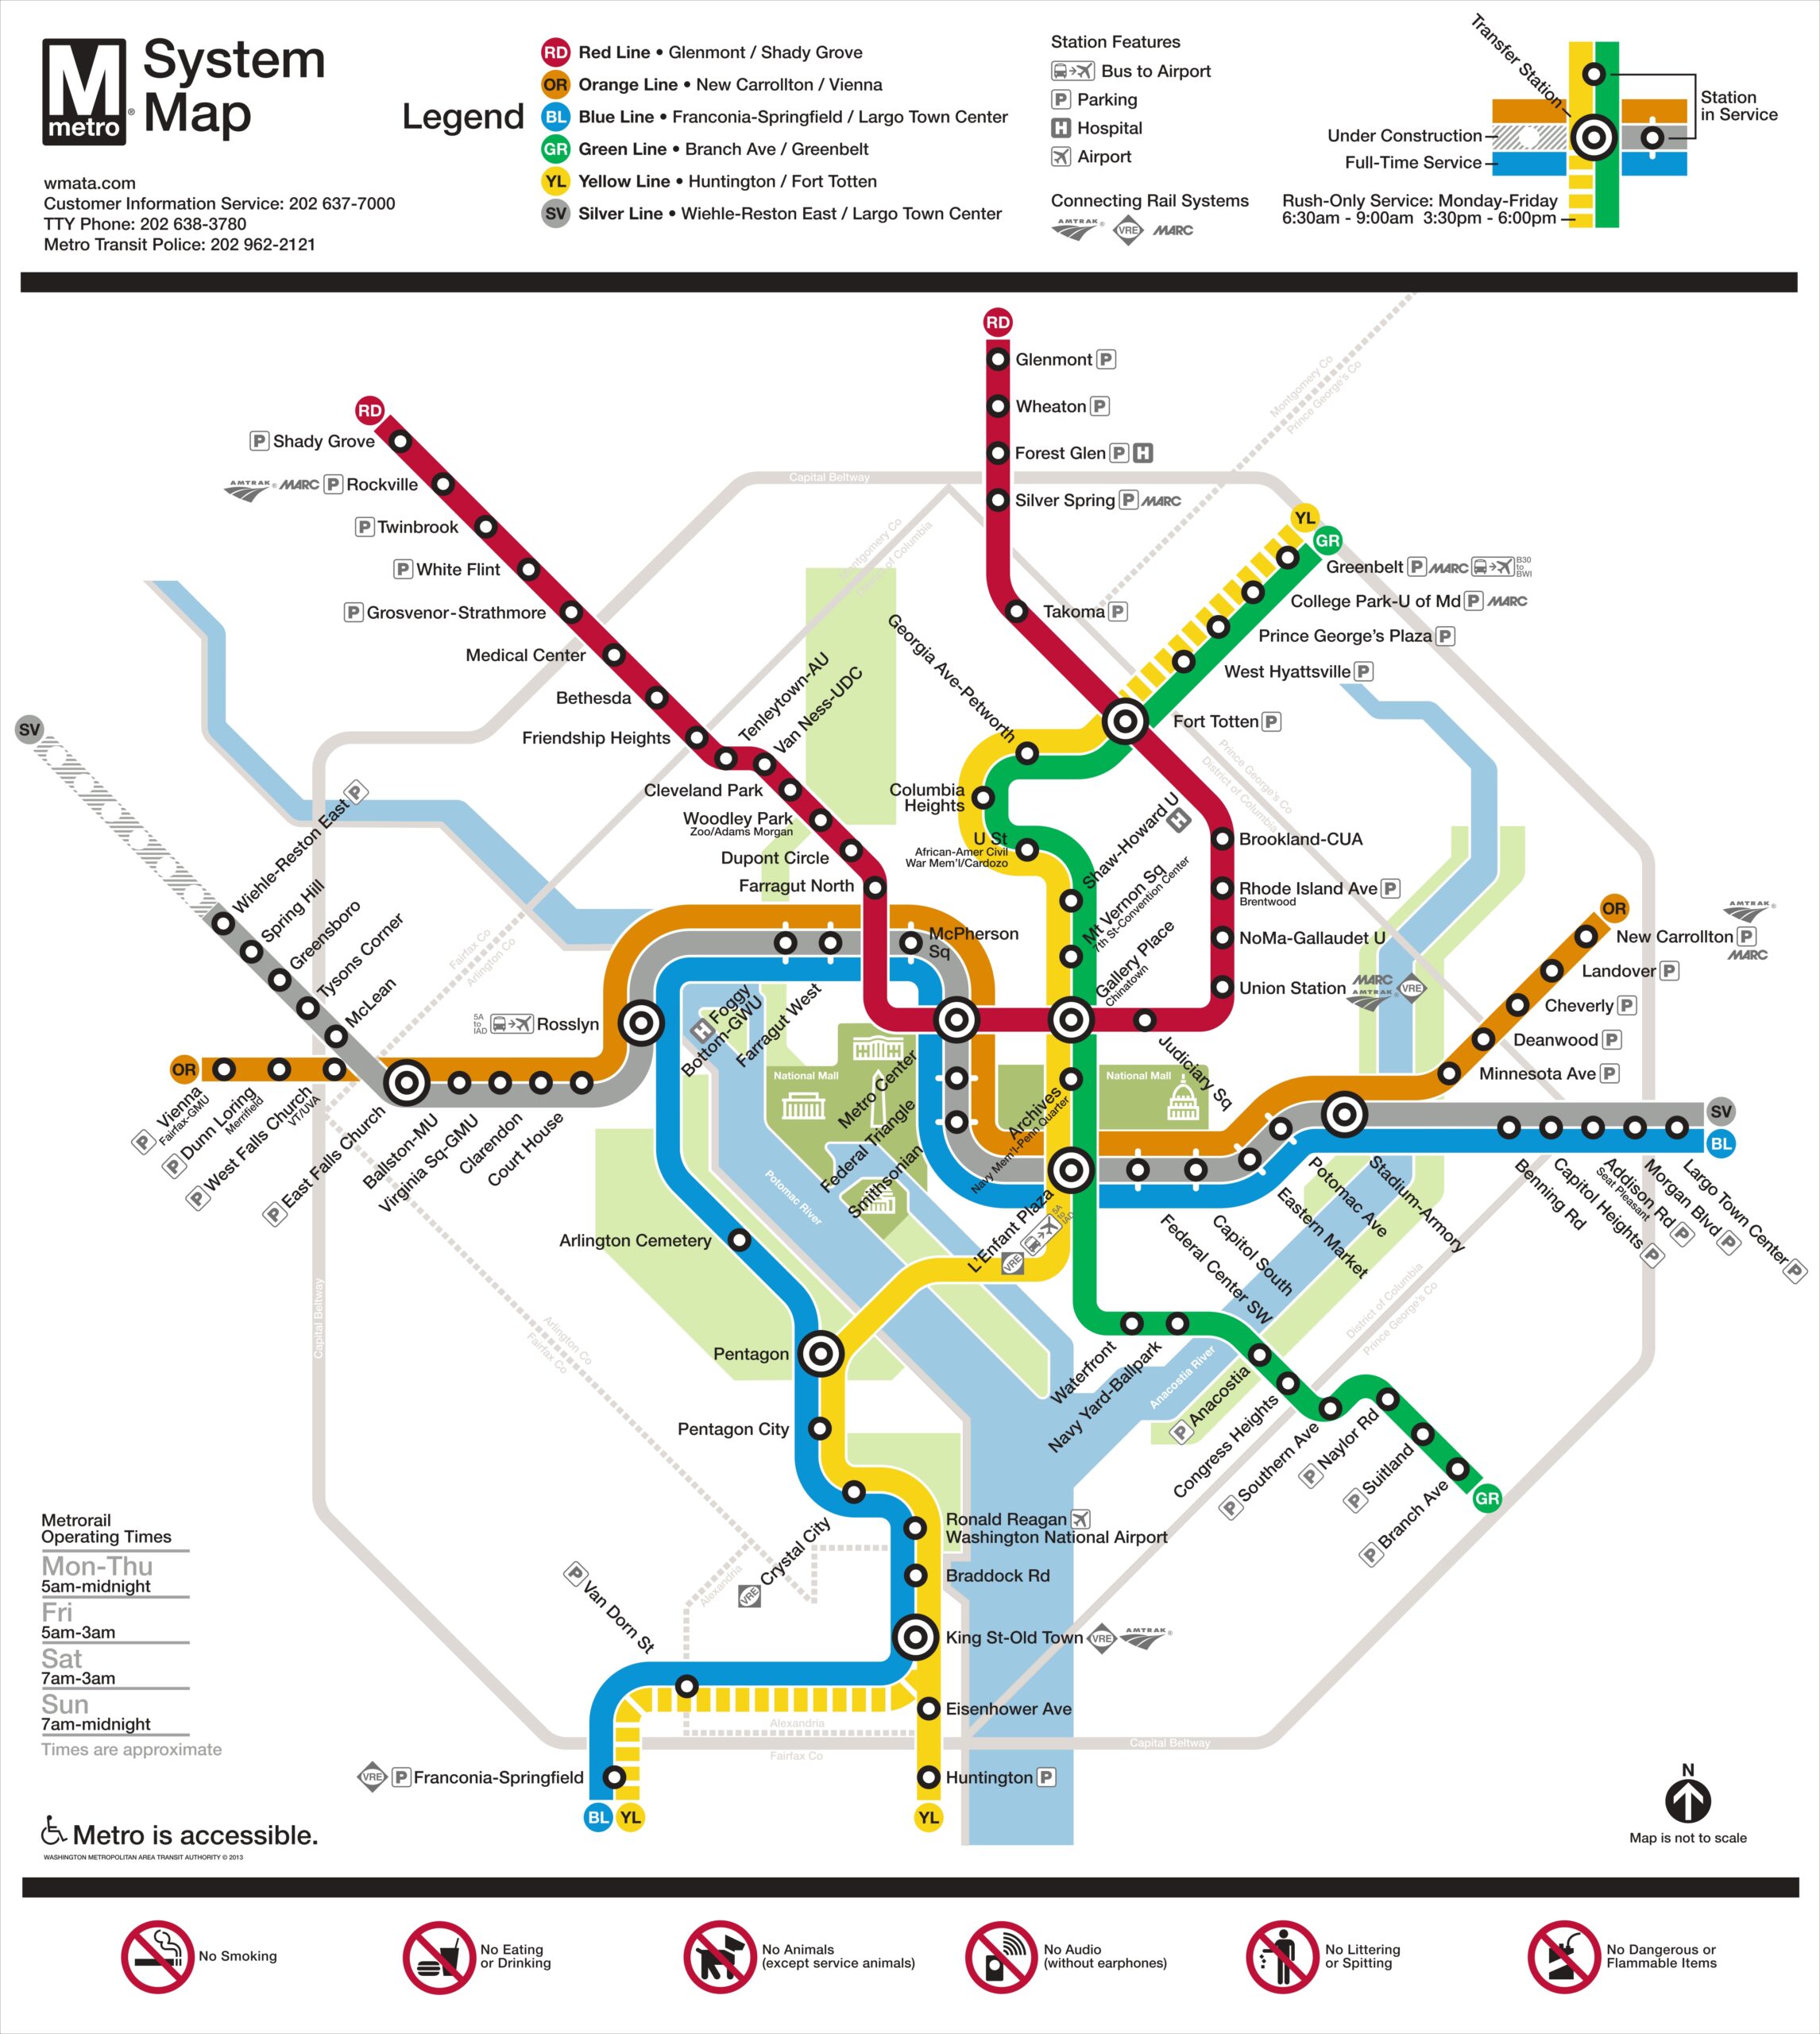 A map of the Washington DC Metro system, showing all six lines (Red, Blue, Orange, Silver, Yellow, and Green) and their stations. The map also includes information about transfer stations, parking, and accessibility.